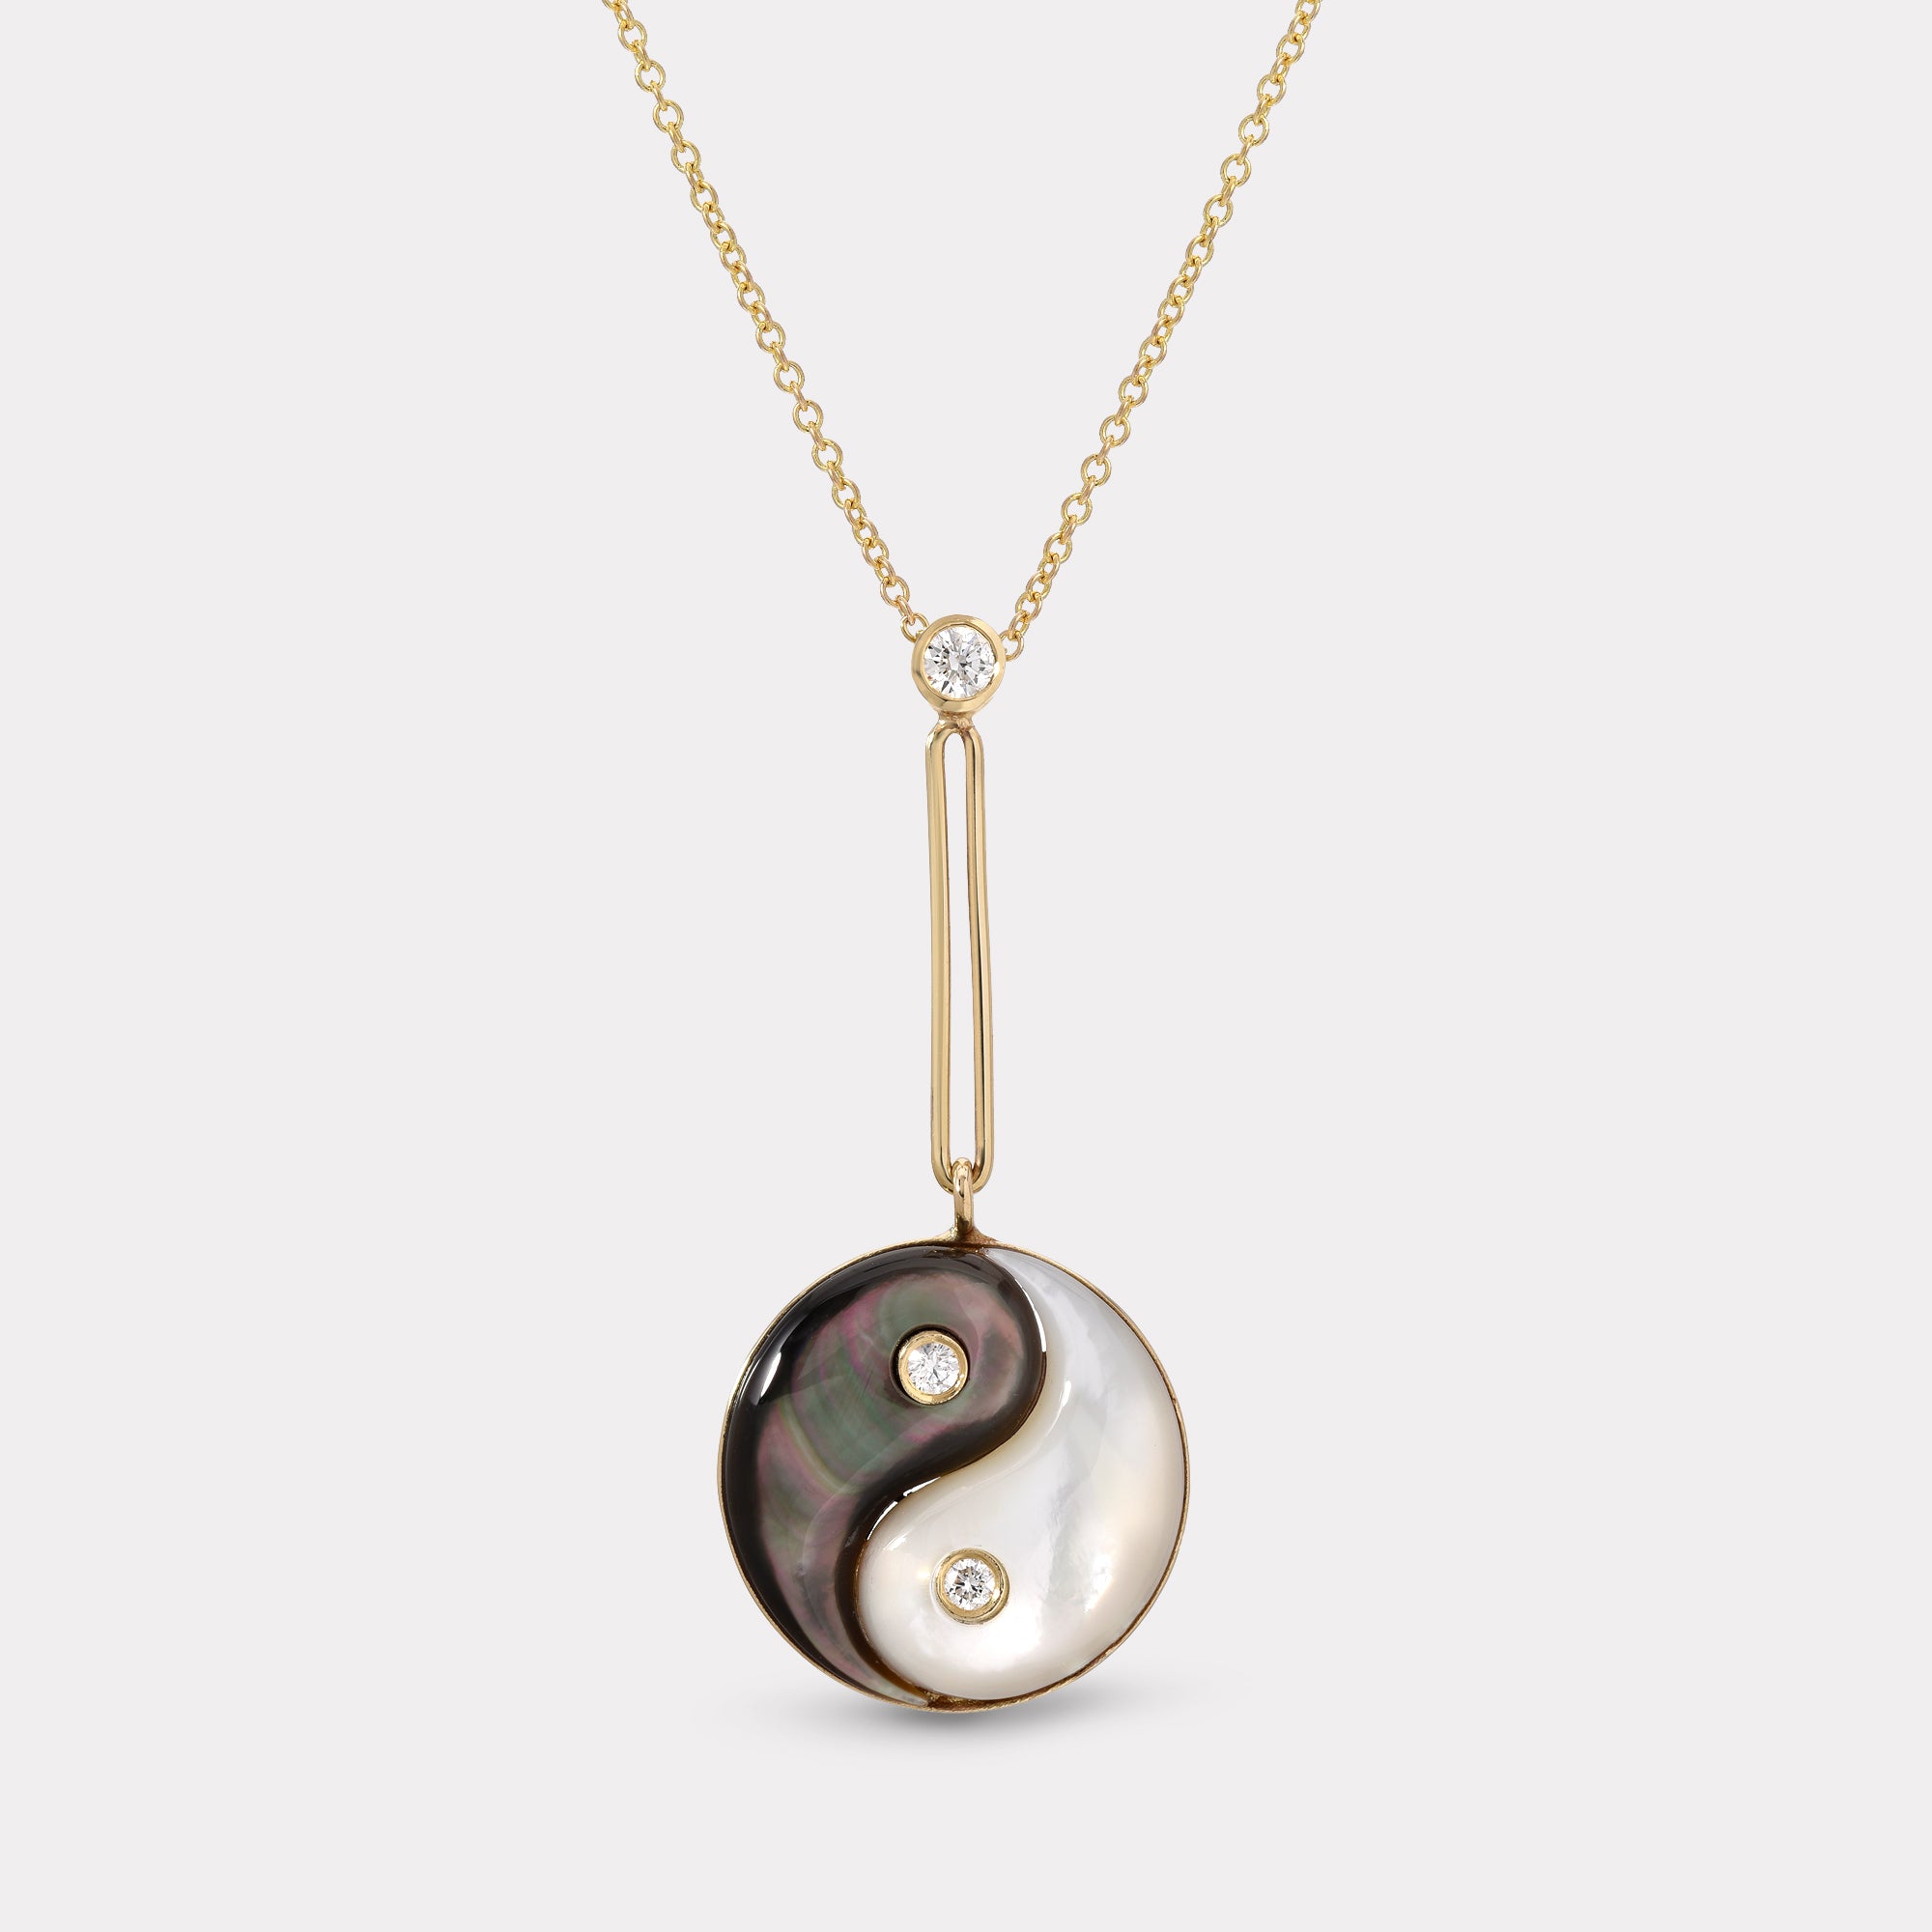 Mother-of-Pearl Yin-Yang Beads – The Neon Tea Party